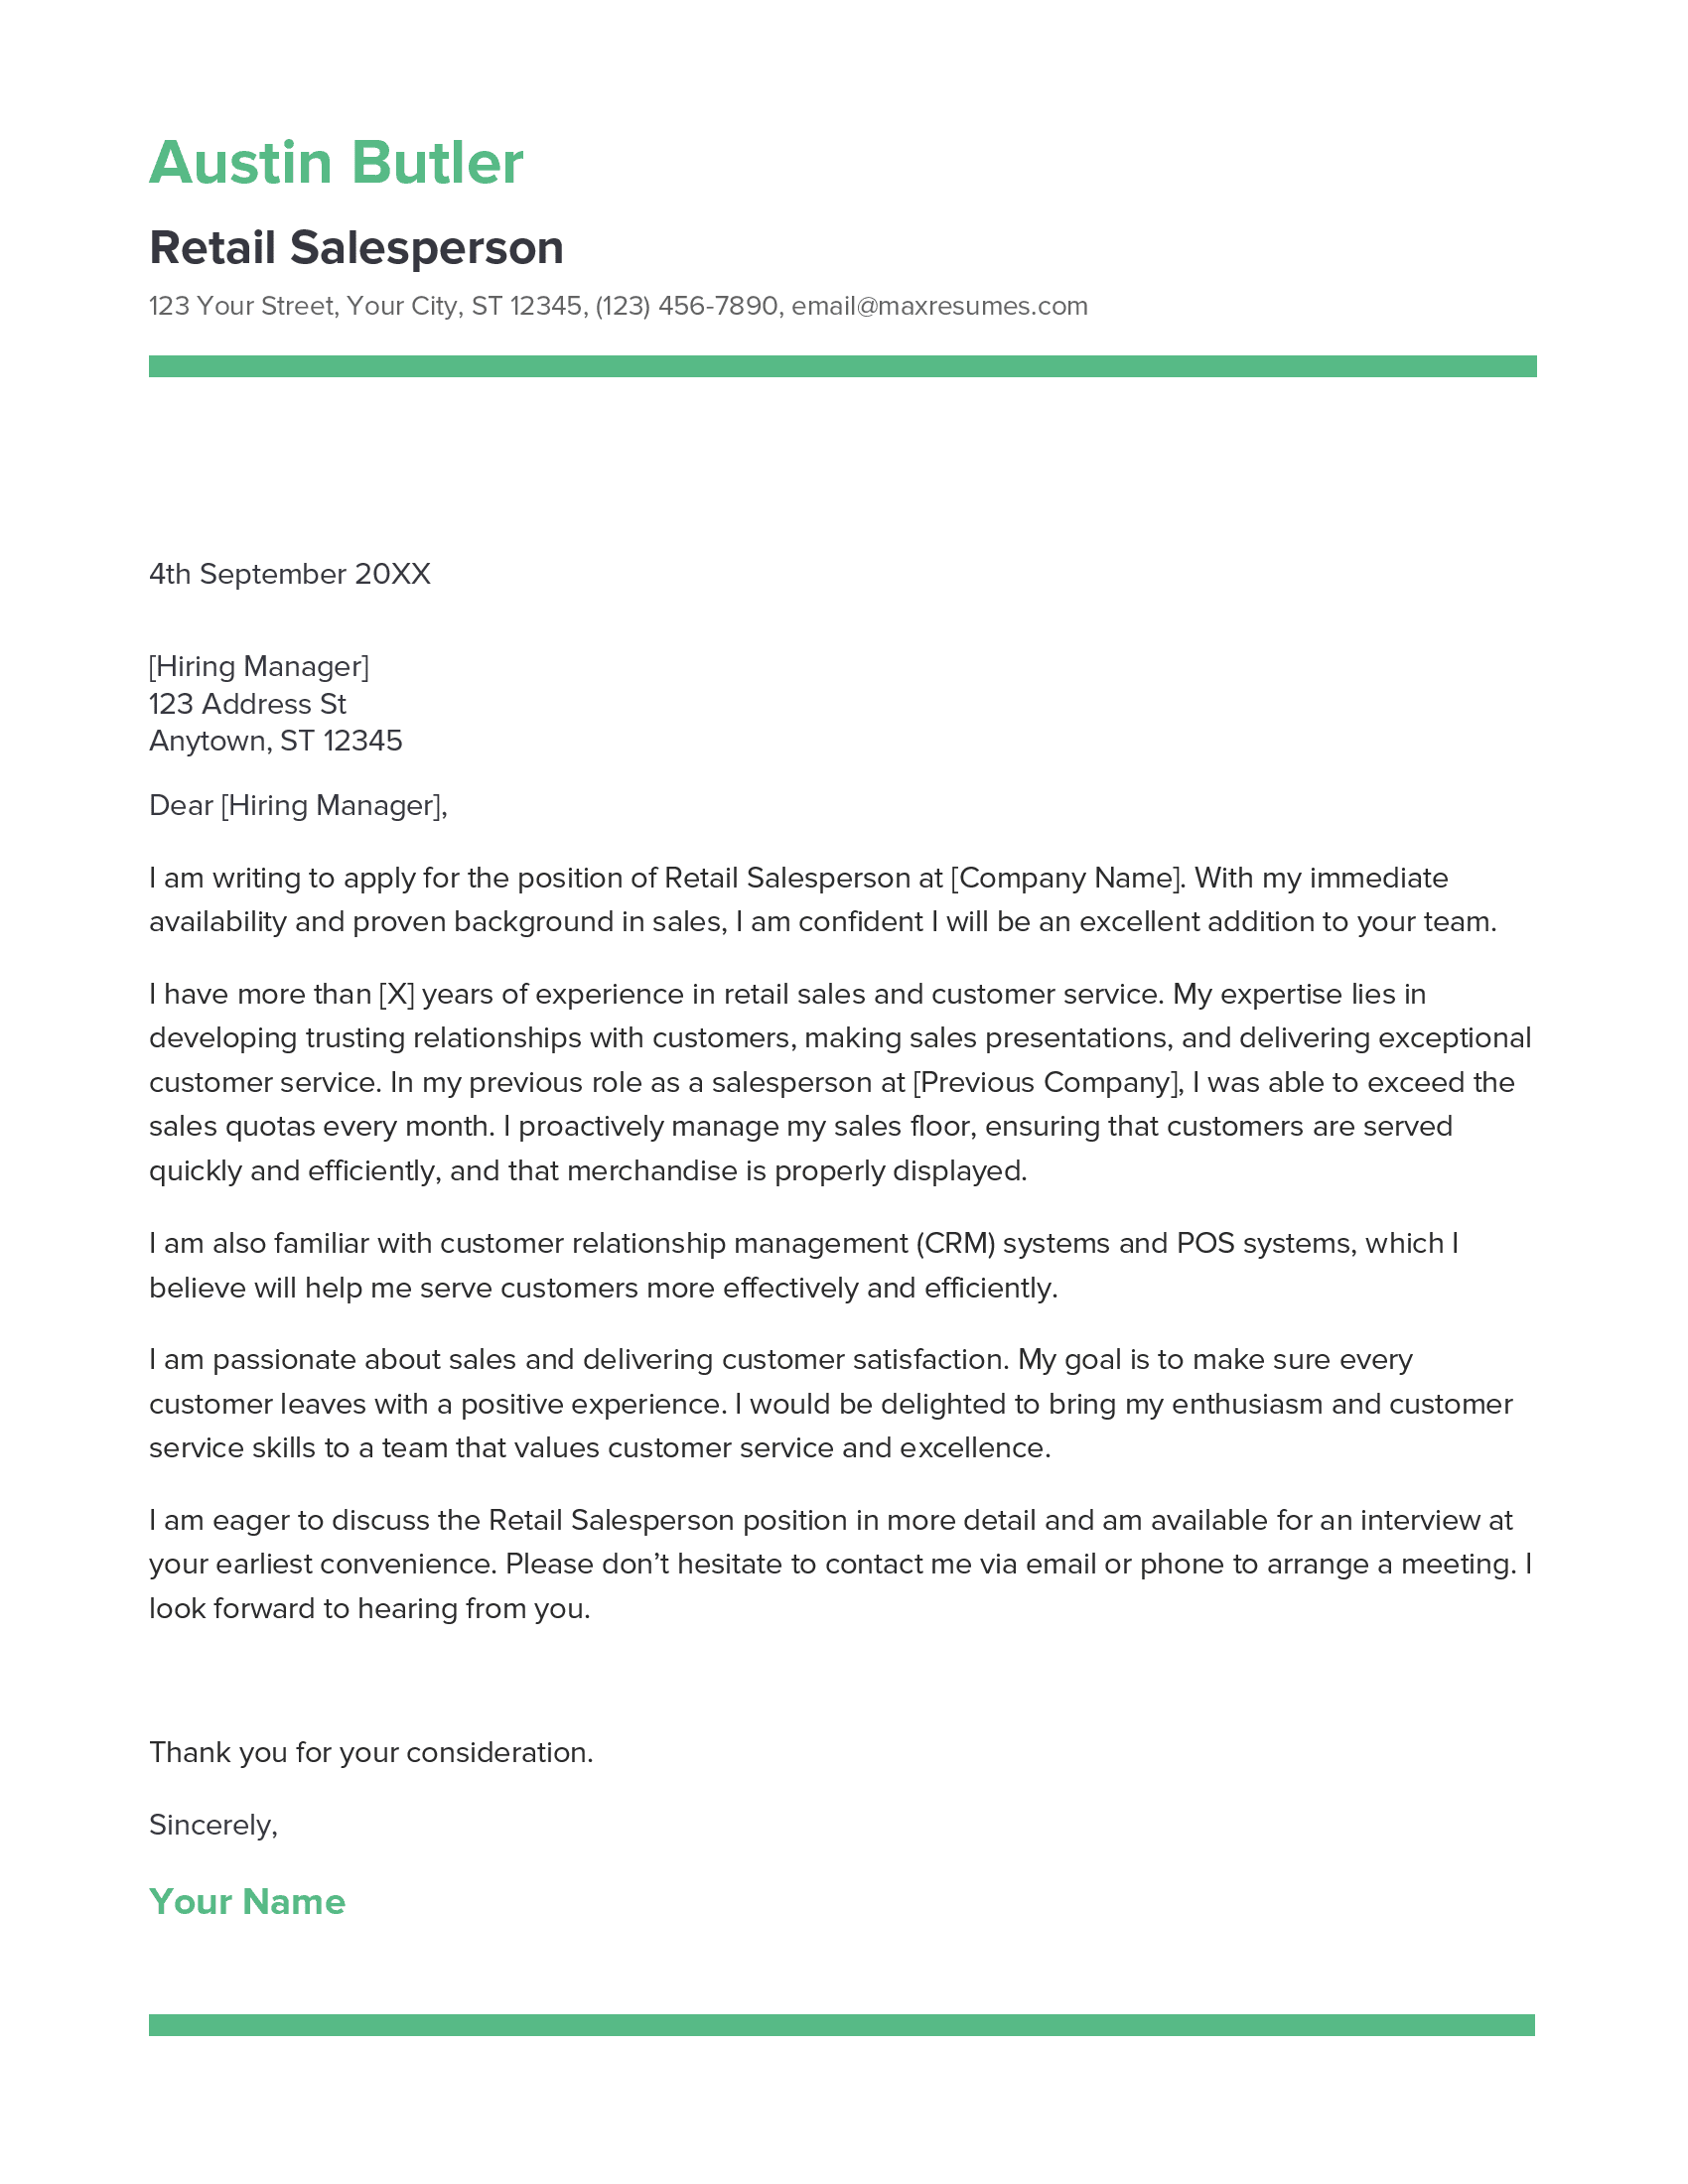 sales person cover letter sample